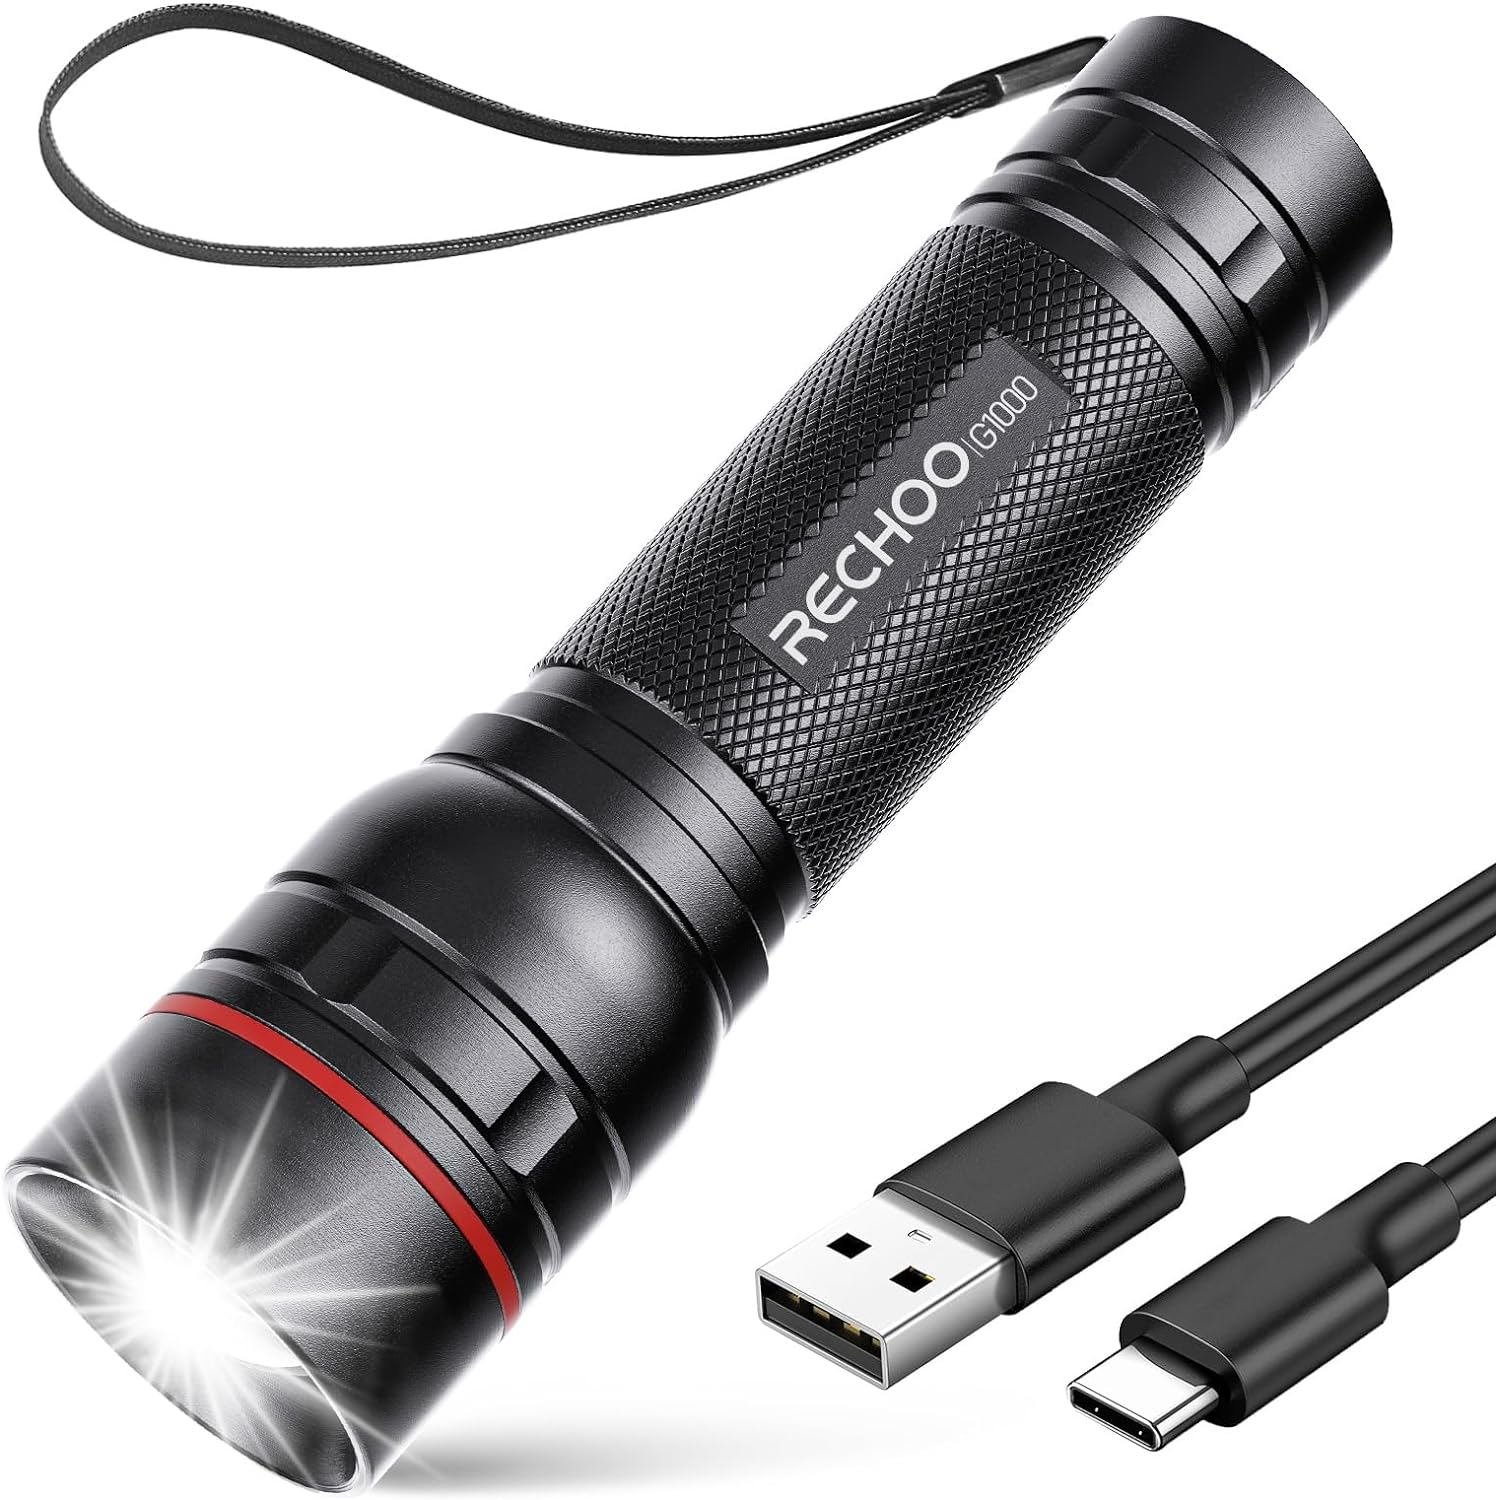 RECHOO Rechargeable Flashlights High Lumens, G1000 Super Bright Flash Light, Small Zoomable Led Flashlight with 3 Lighting Modes, Portable Tactical Flashlights for Camping (Battery Included)